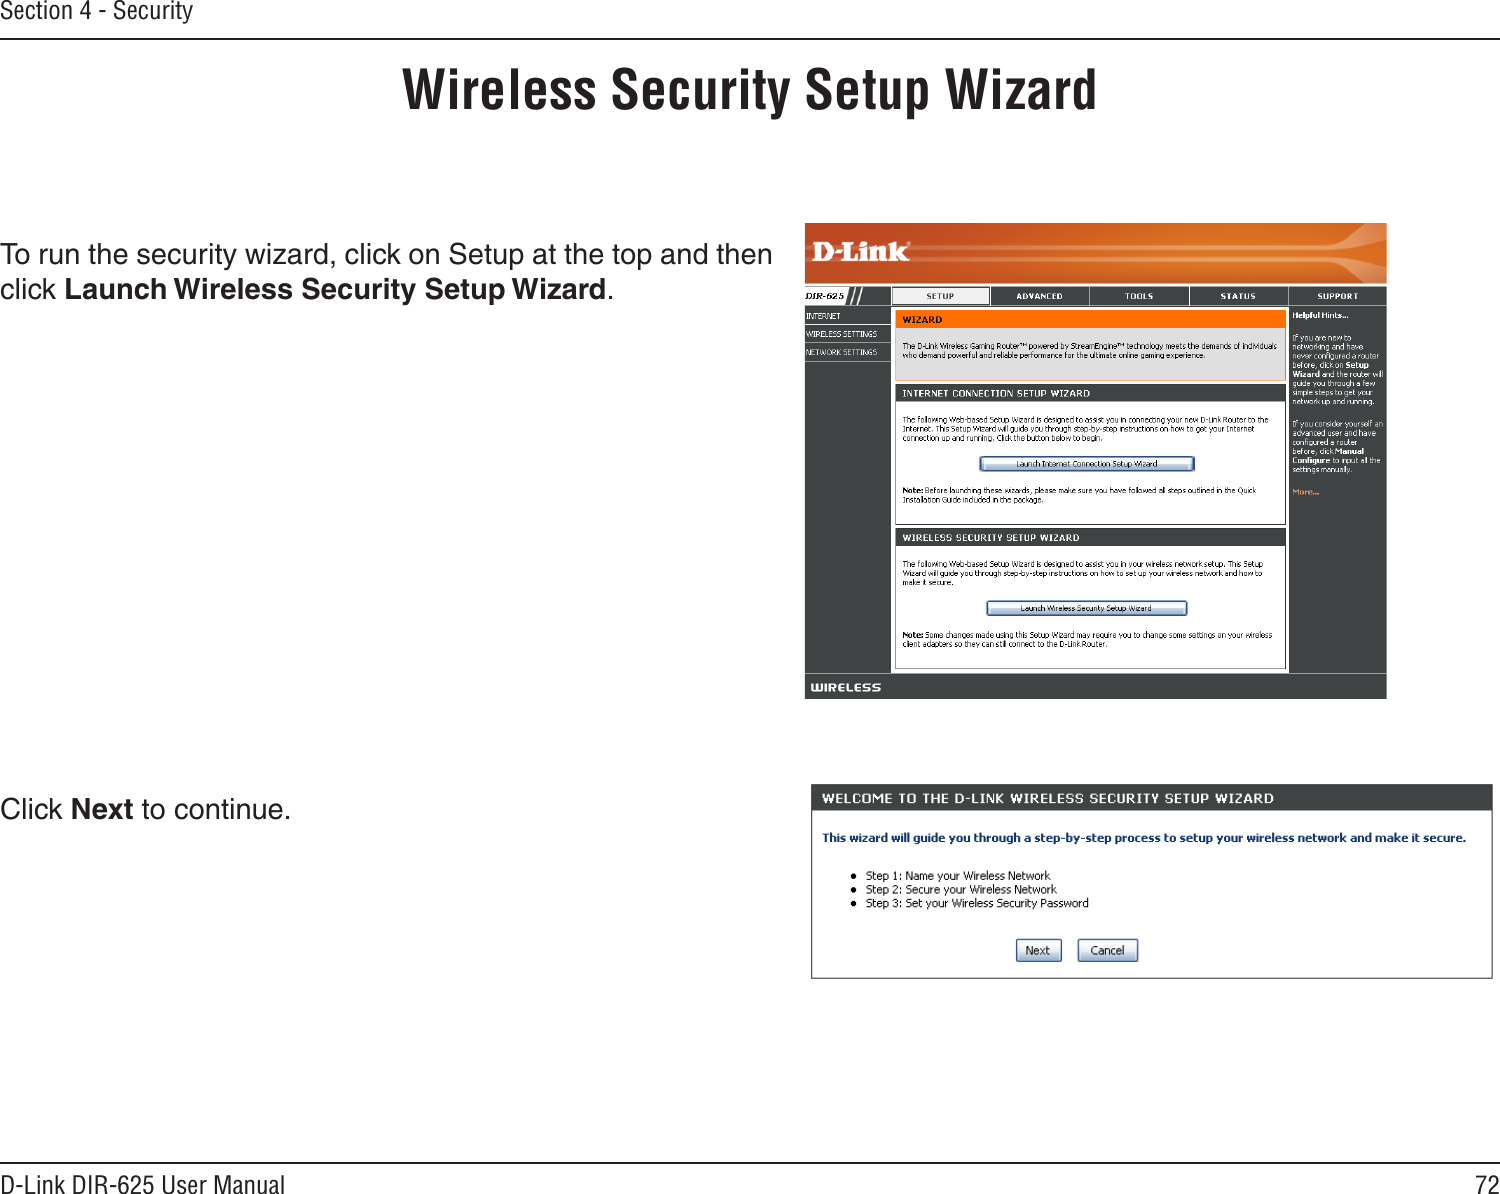 72D-Link DIR-625 User ManualSection 4 - SecurityWireless Security Setup WizardTo run the security wizard, click on Setup at the top and then click Launch Wireless Security Setup Wizard.Click Next to continue.